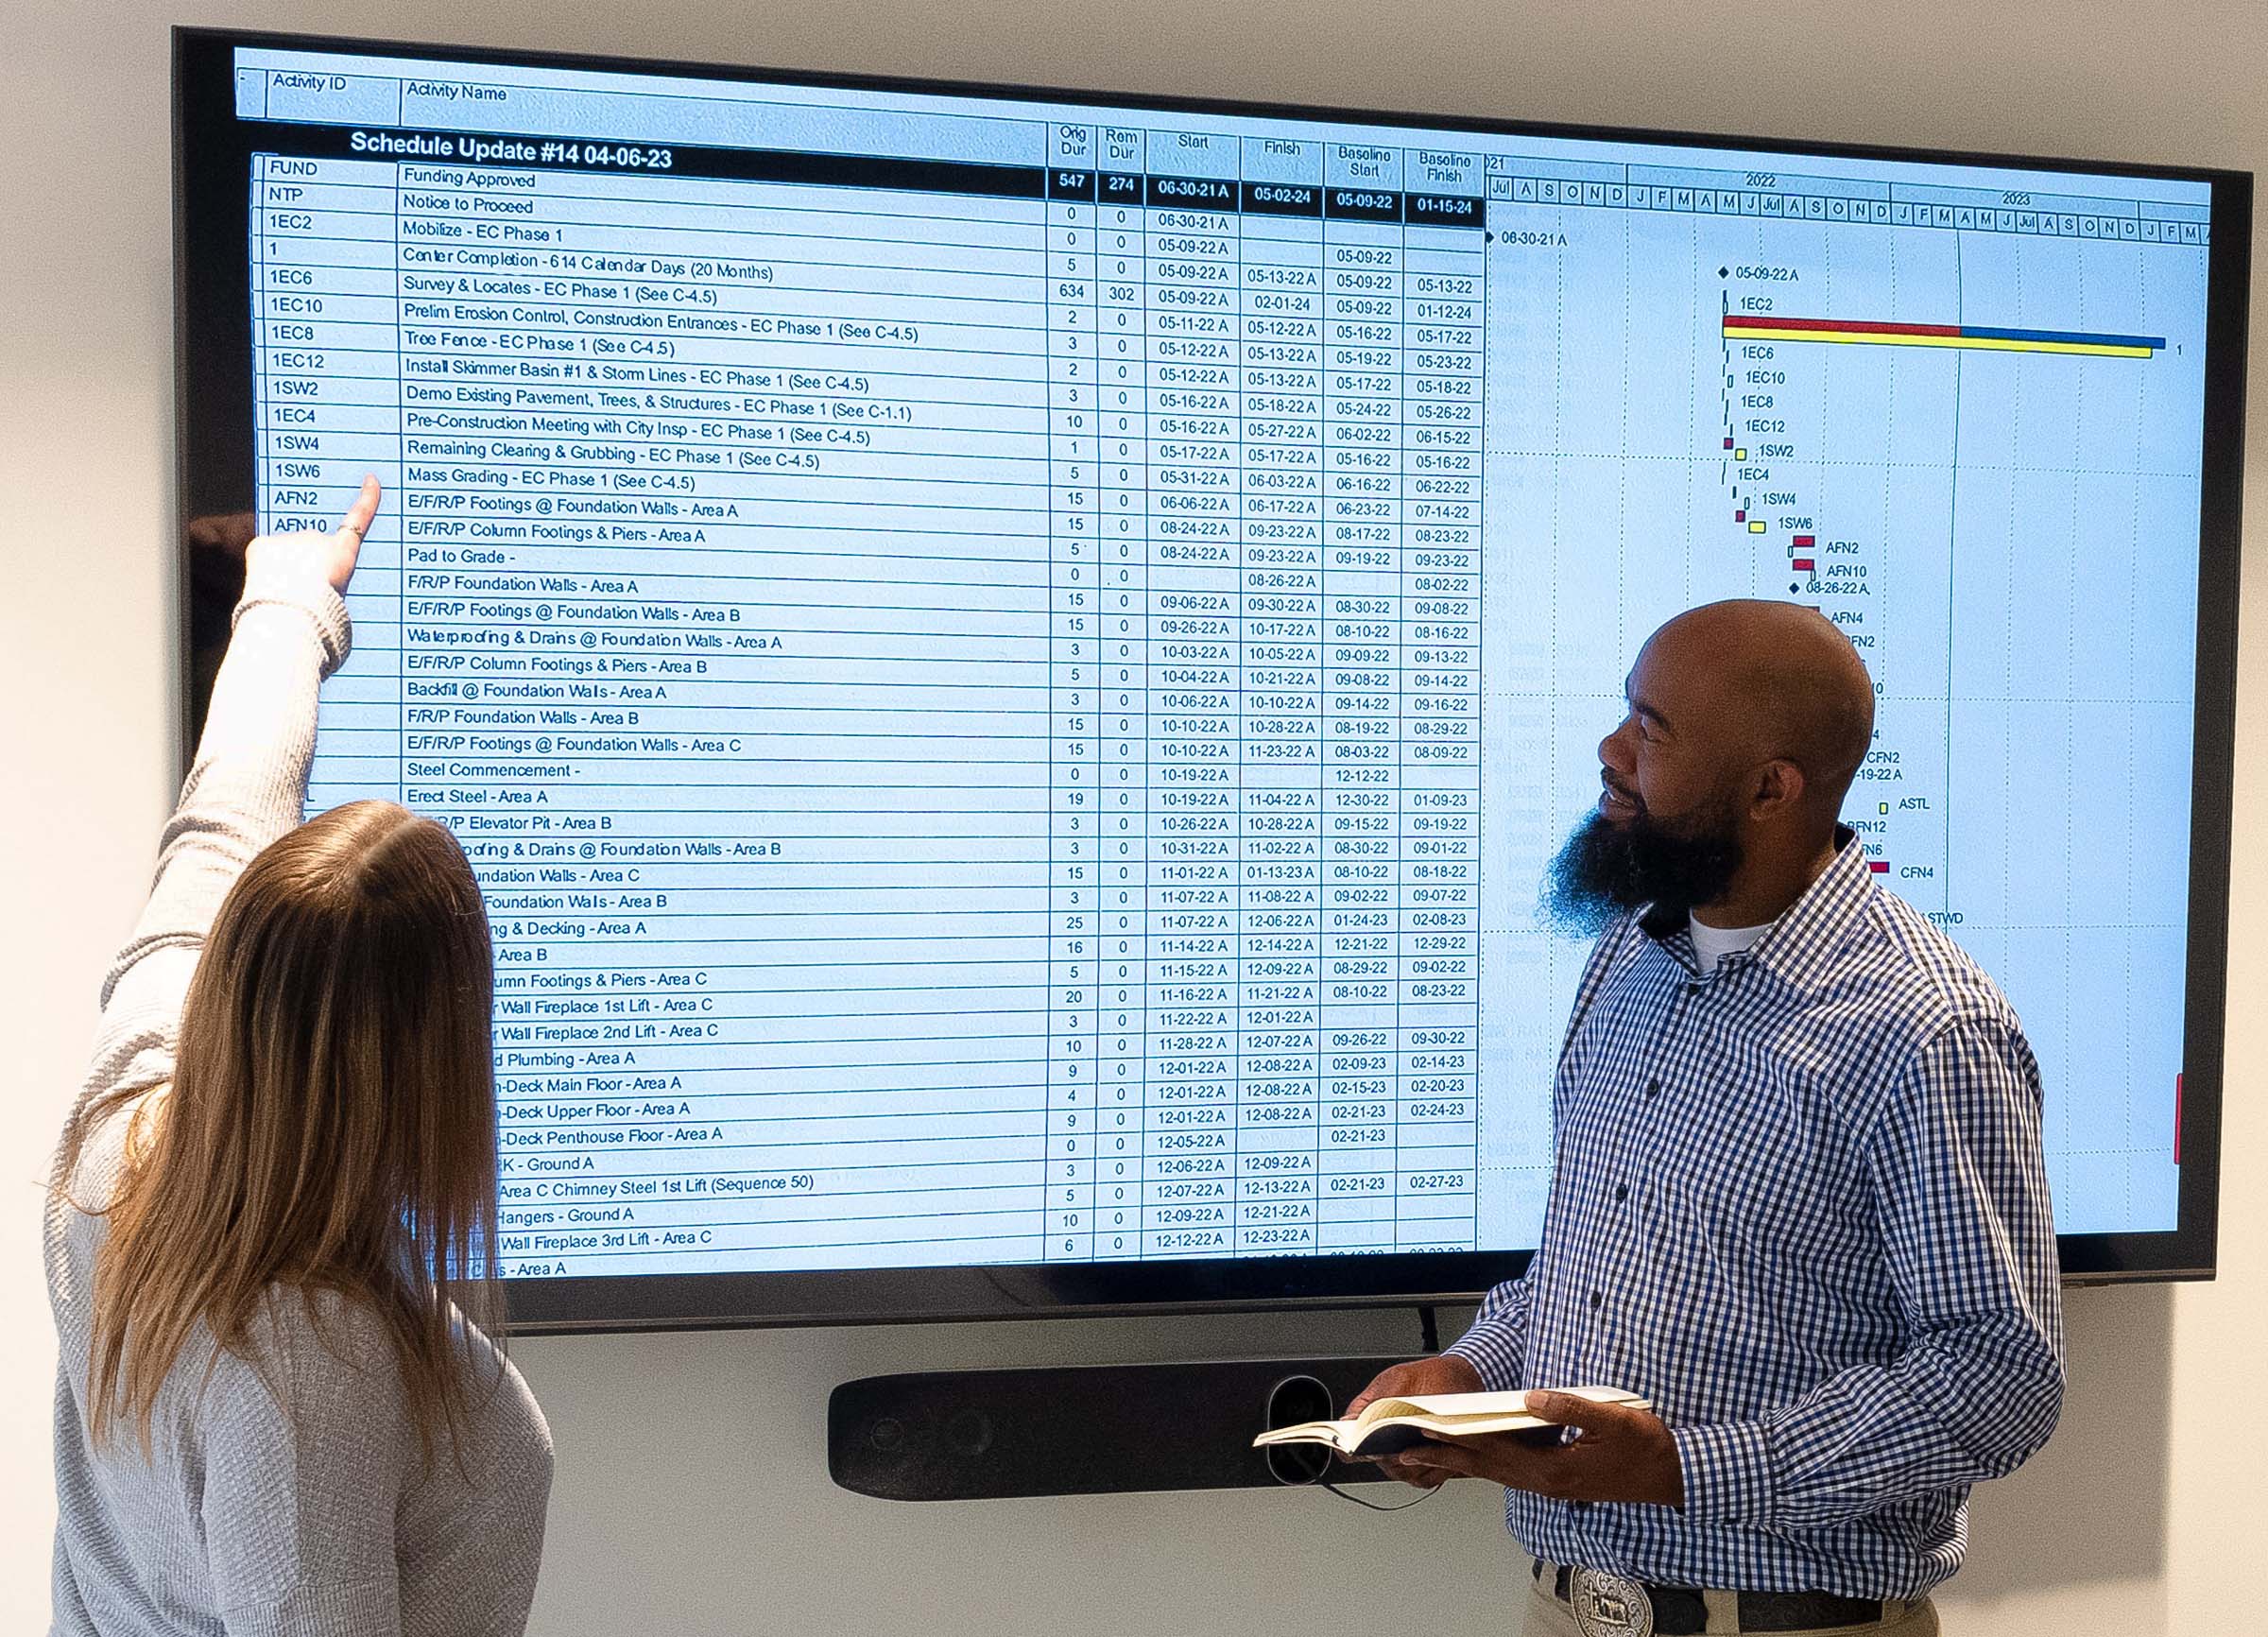 Blum Construction's Pre-Construction Team stands in front of a digital display board, preparing for a large building project in North Carolina.